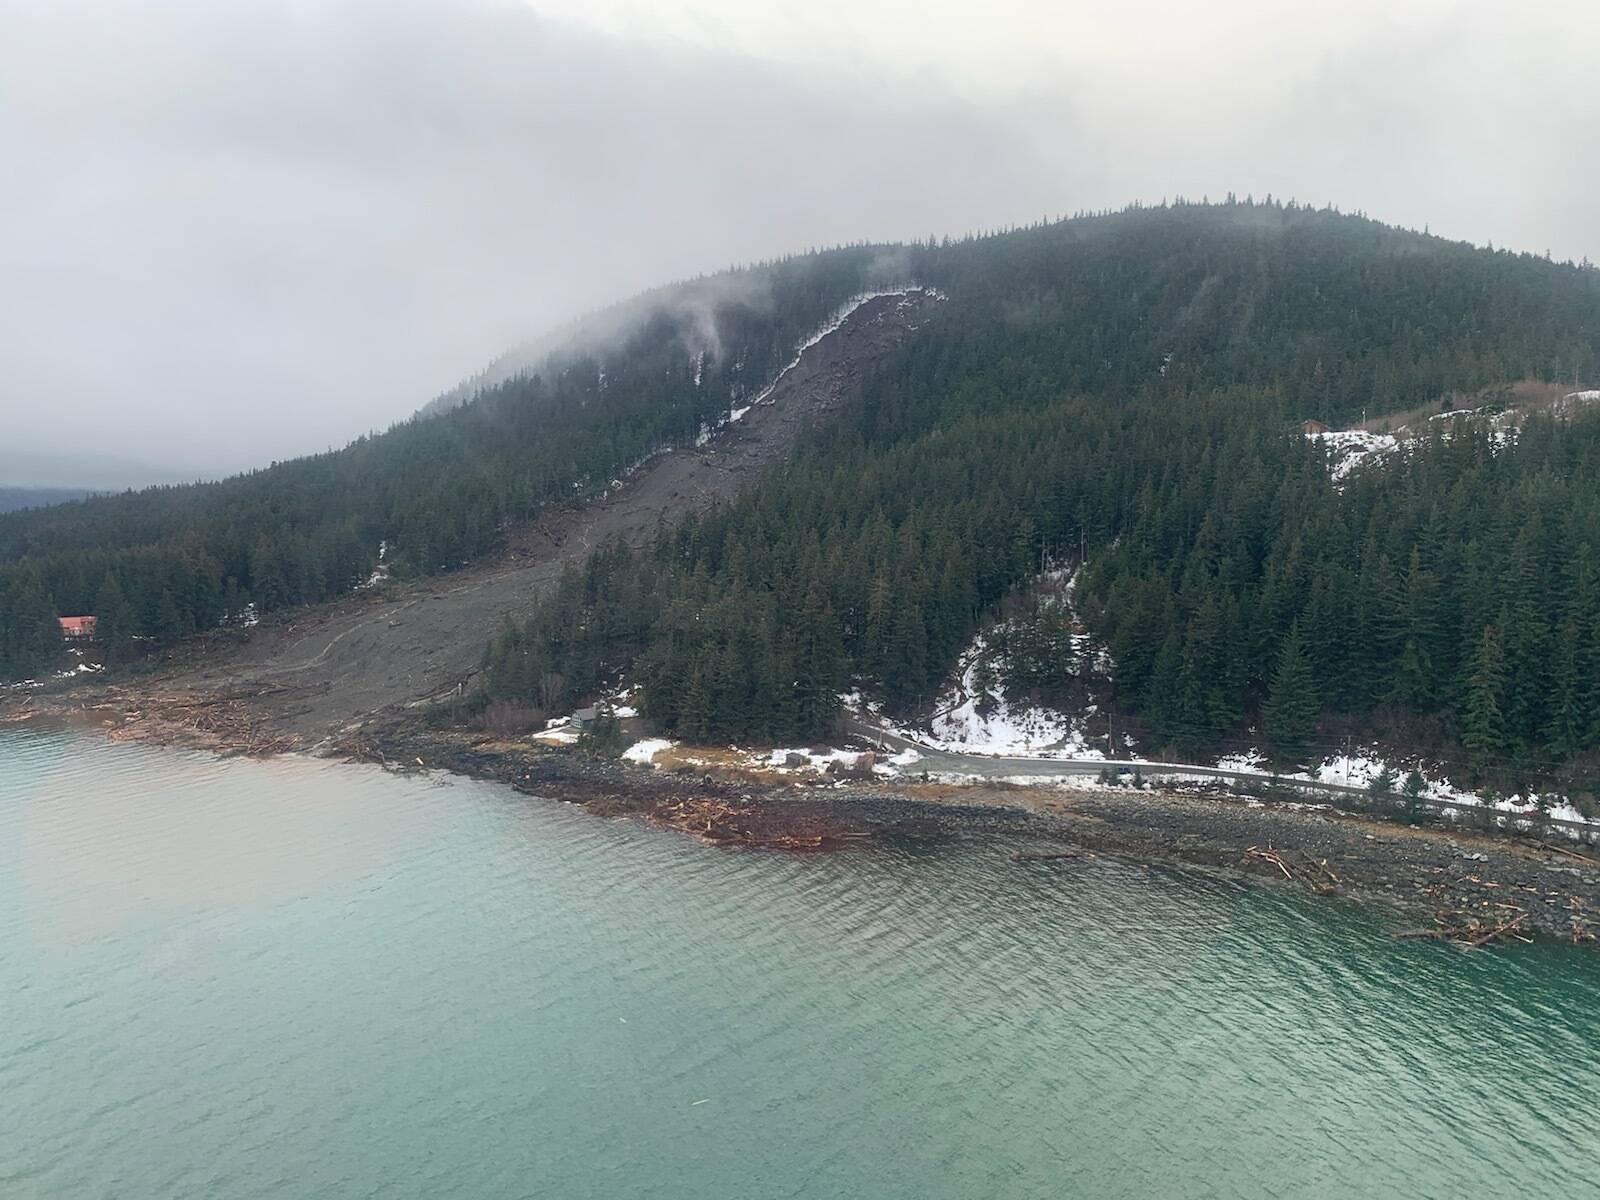 A rainstorm caused landslides in Haines, Alaska, December 3, 2020. The Coast Guard remains engaged with the Alaska State Troopers and the city of Haines while responding to this event. –U.S. Coast Guard photo by Lt. Erick Oredson